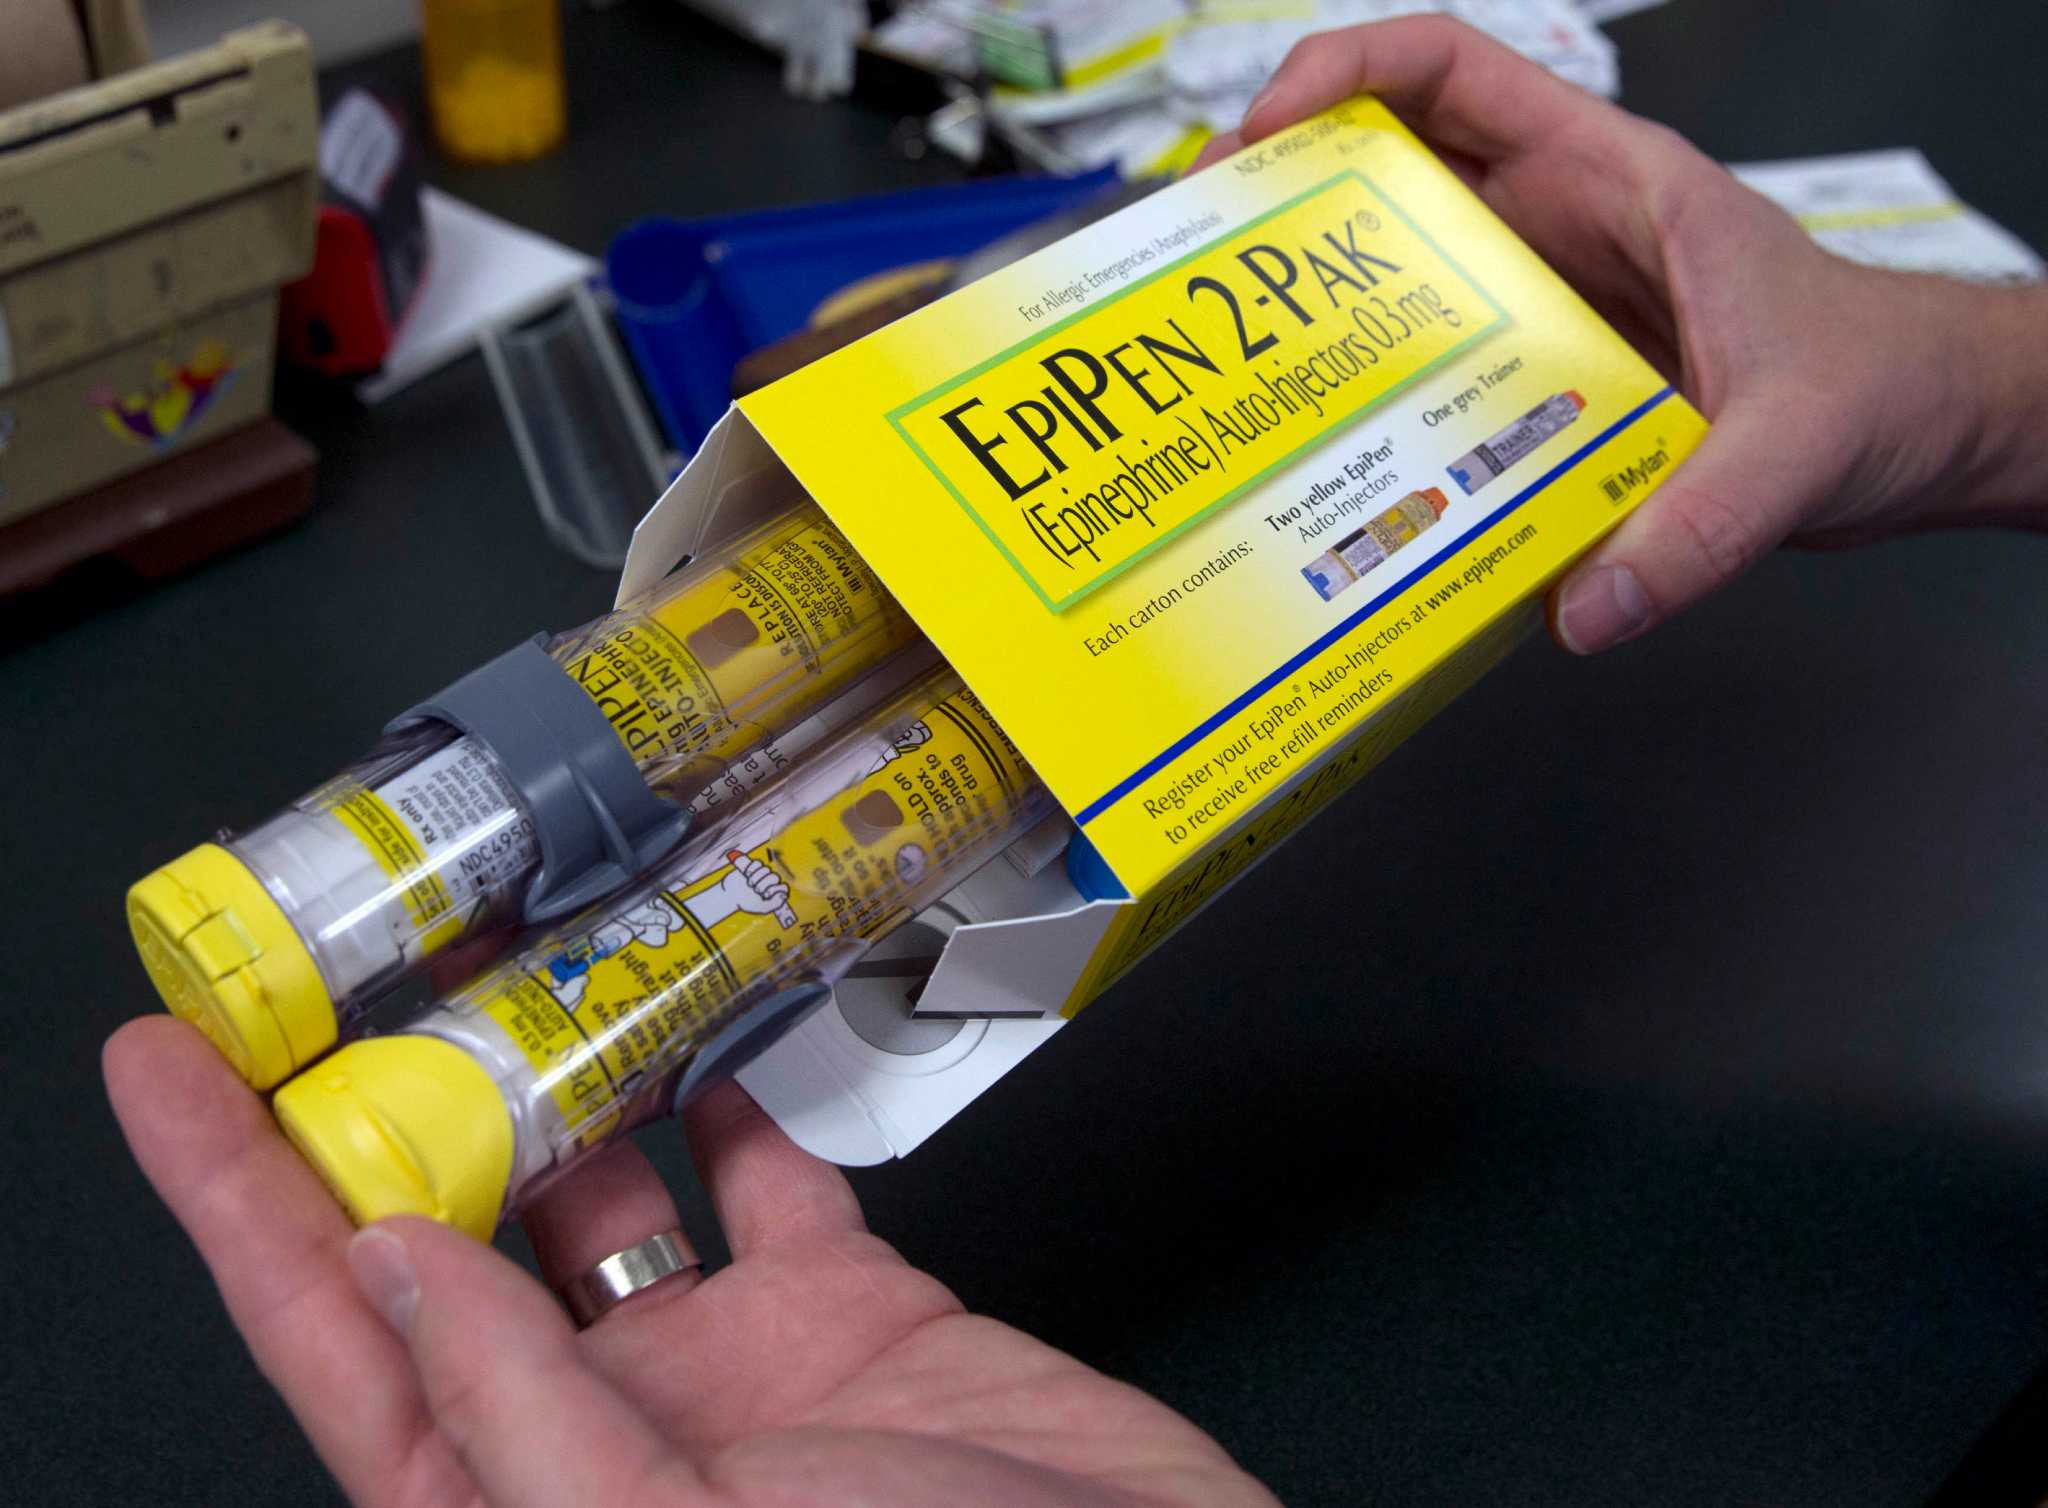 Bill would require EpiPens, training at large public venues